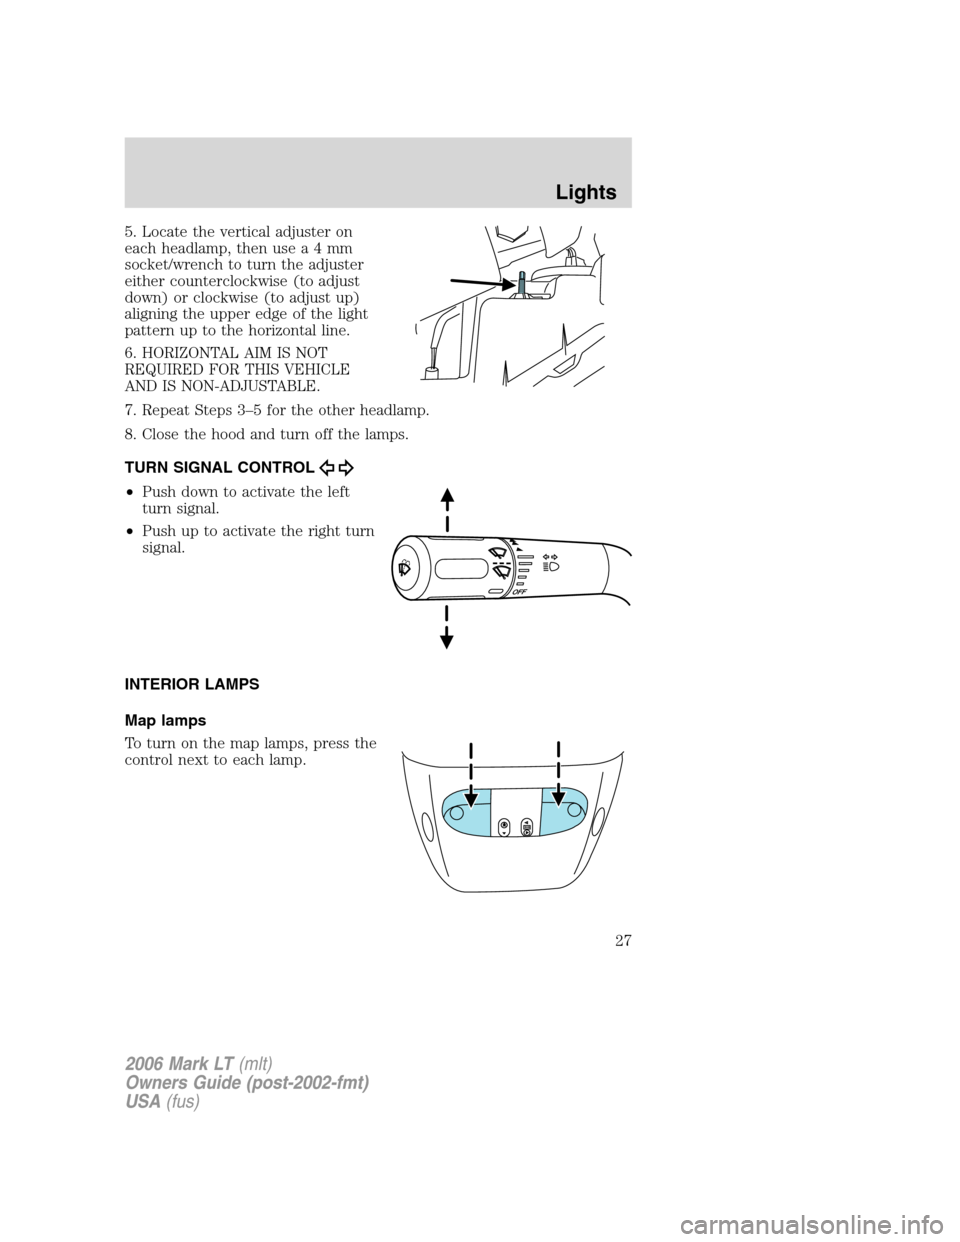 LINCOLN MARK LT 2006  Owners Manual 5. Locate the vertical adjuster on
each headlamp, then usea4mm
socket/wrench to turn the adjuster
either counterclockwise (to adjust
down) or clockwise (to adjust up)
aligning the upper edge of the li